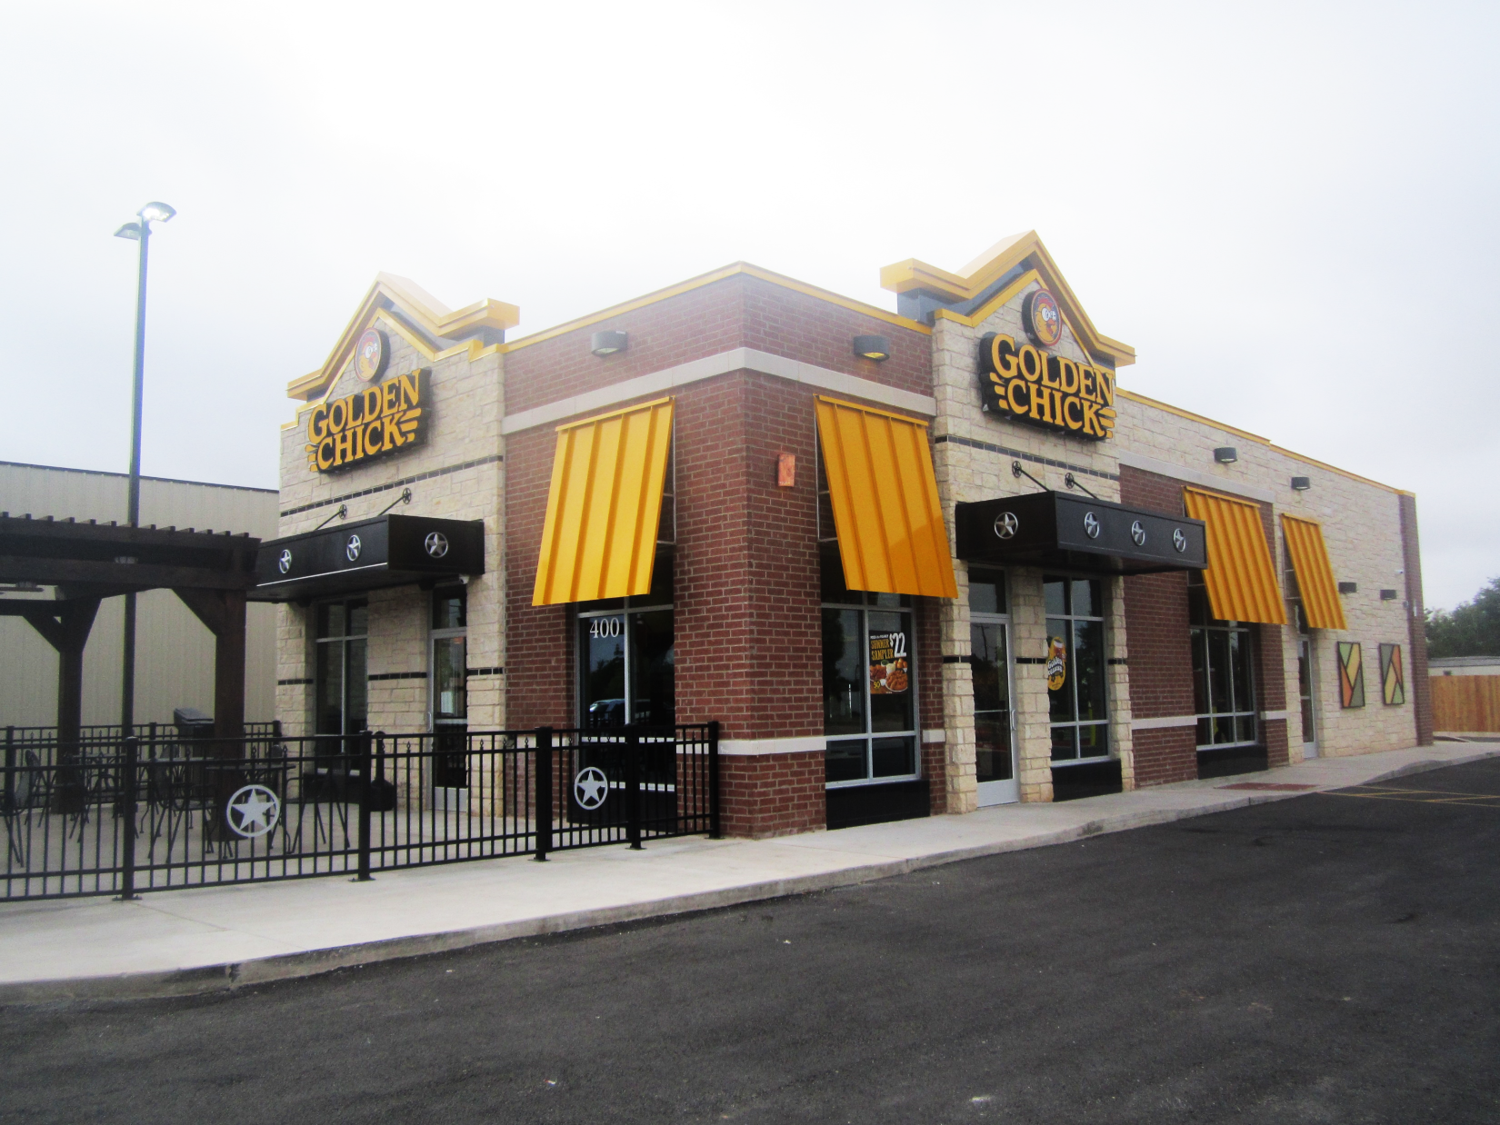 Golden Chick storefront.  Your local Golden Chick fast food restaurant in Midland, Texas